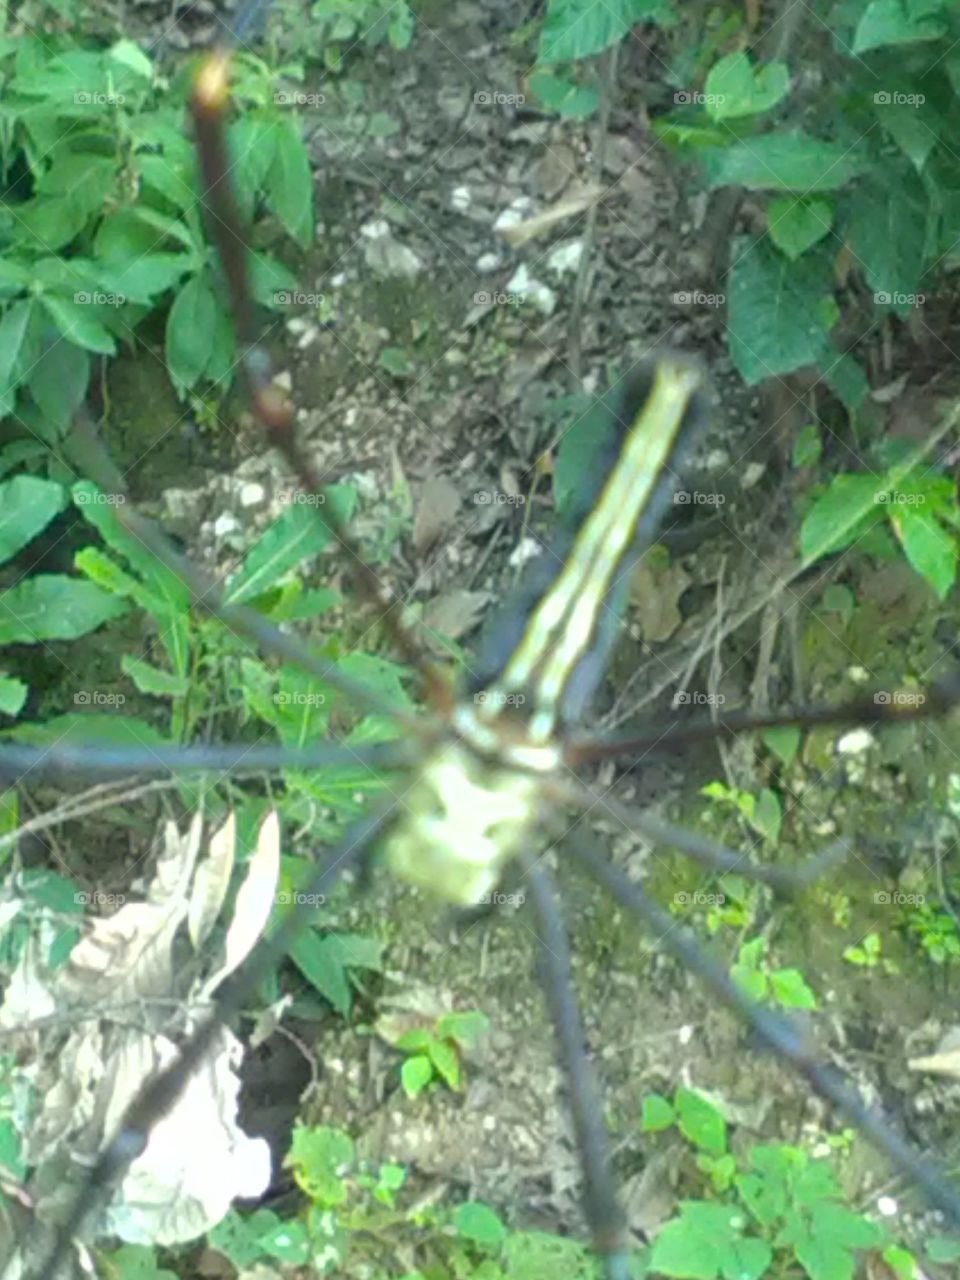 This colored spider hunt the insects by spreading a fast, beautiful but dangerous trap.